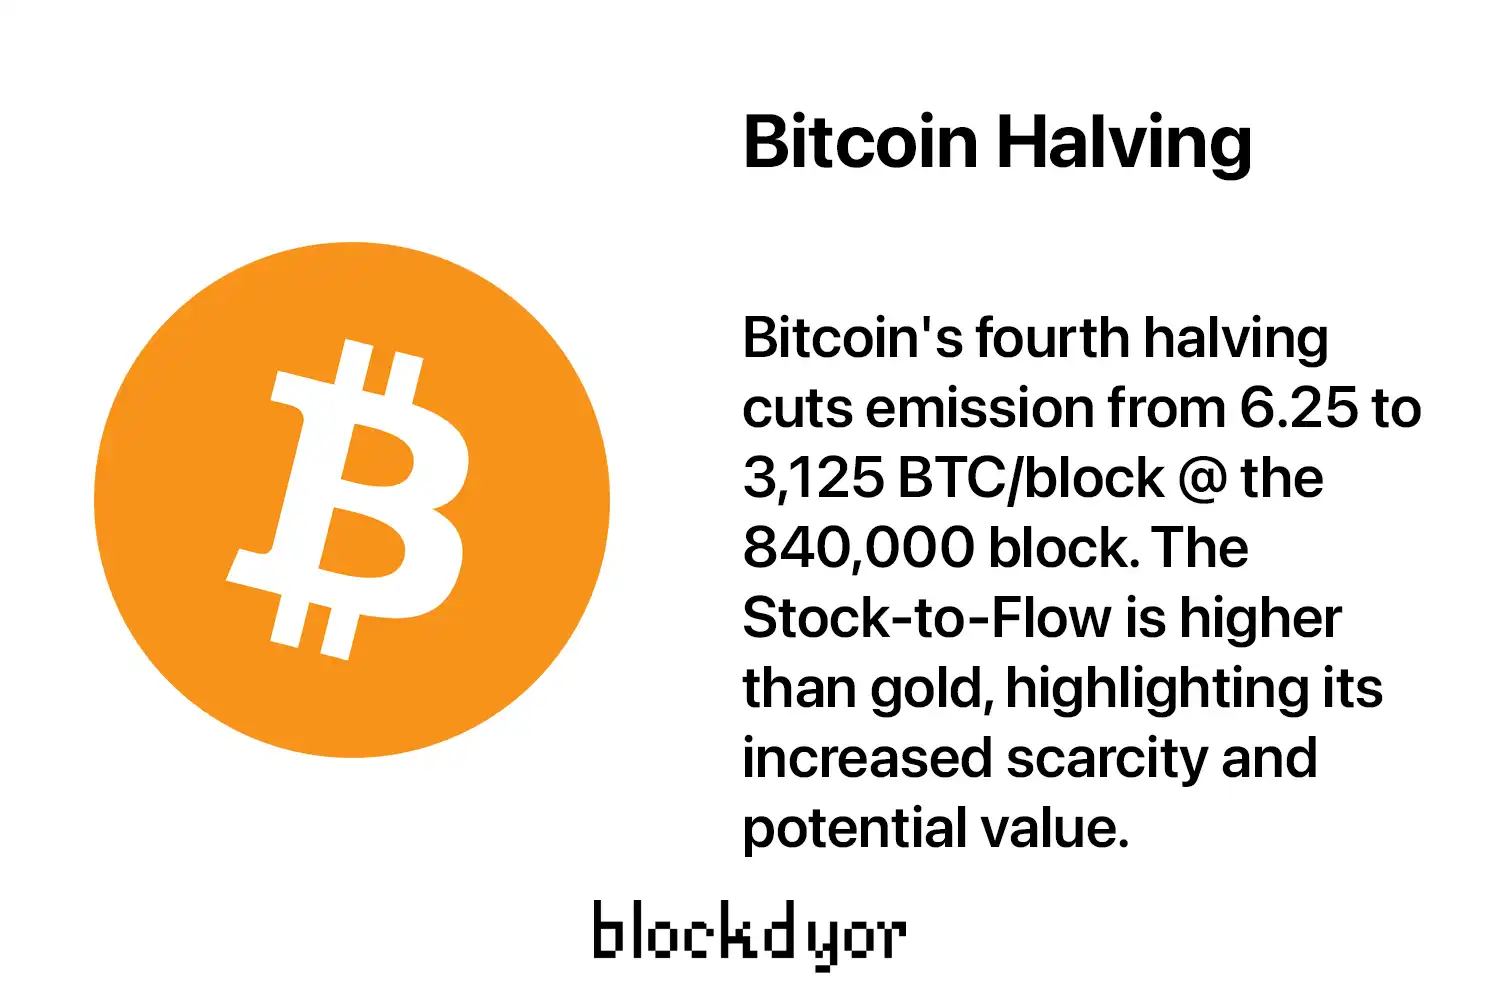 Bitcoin Halving Overview